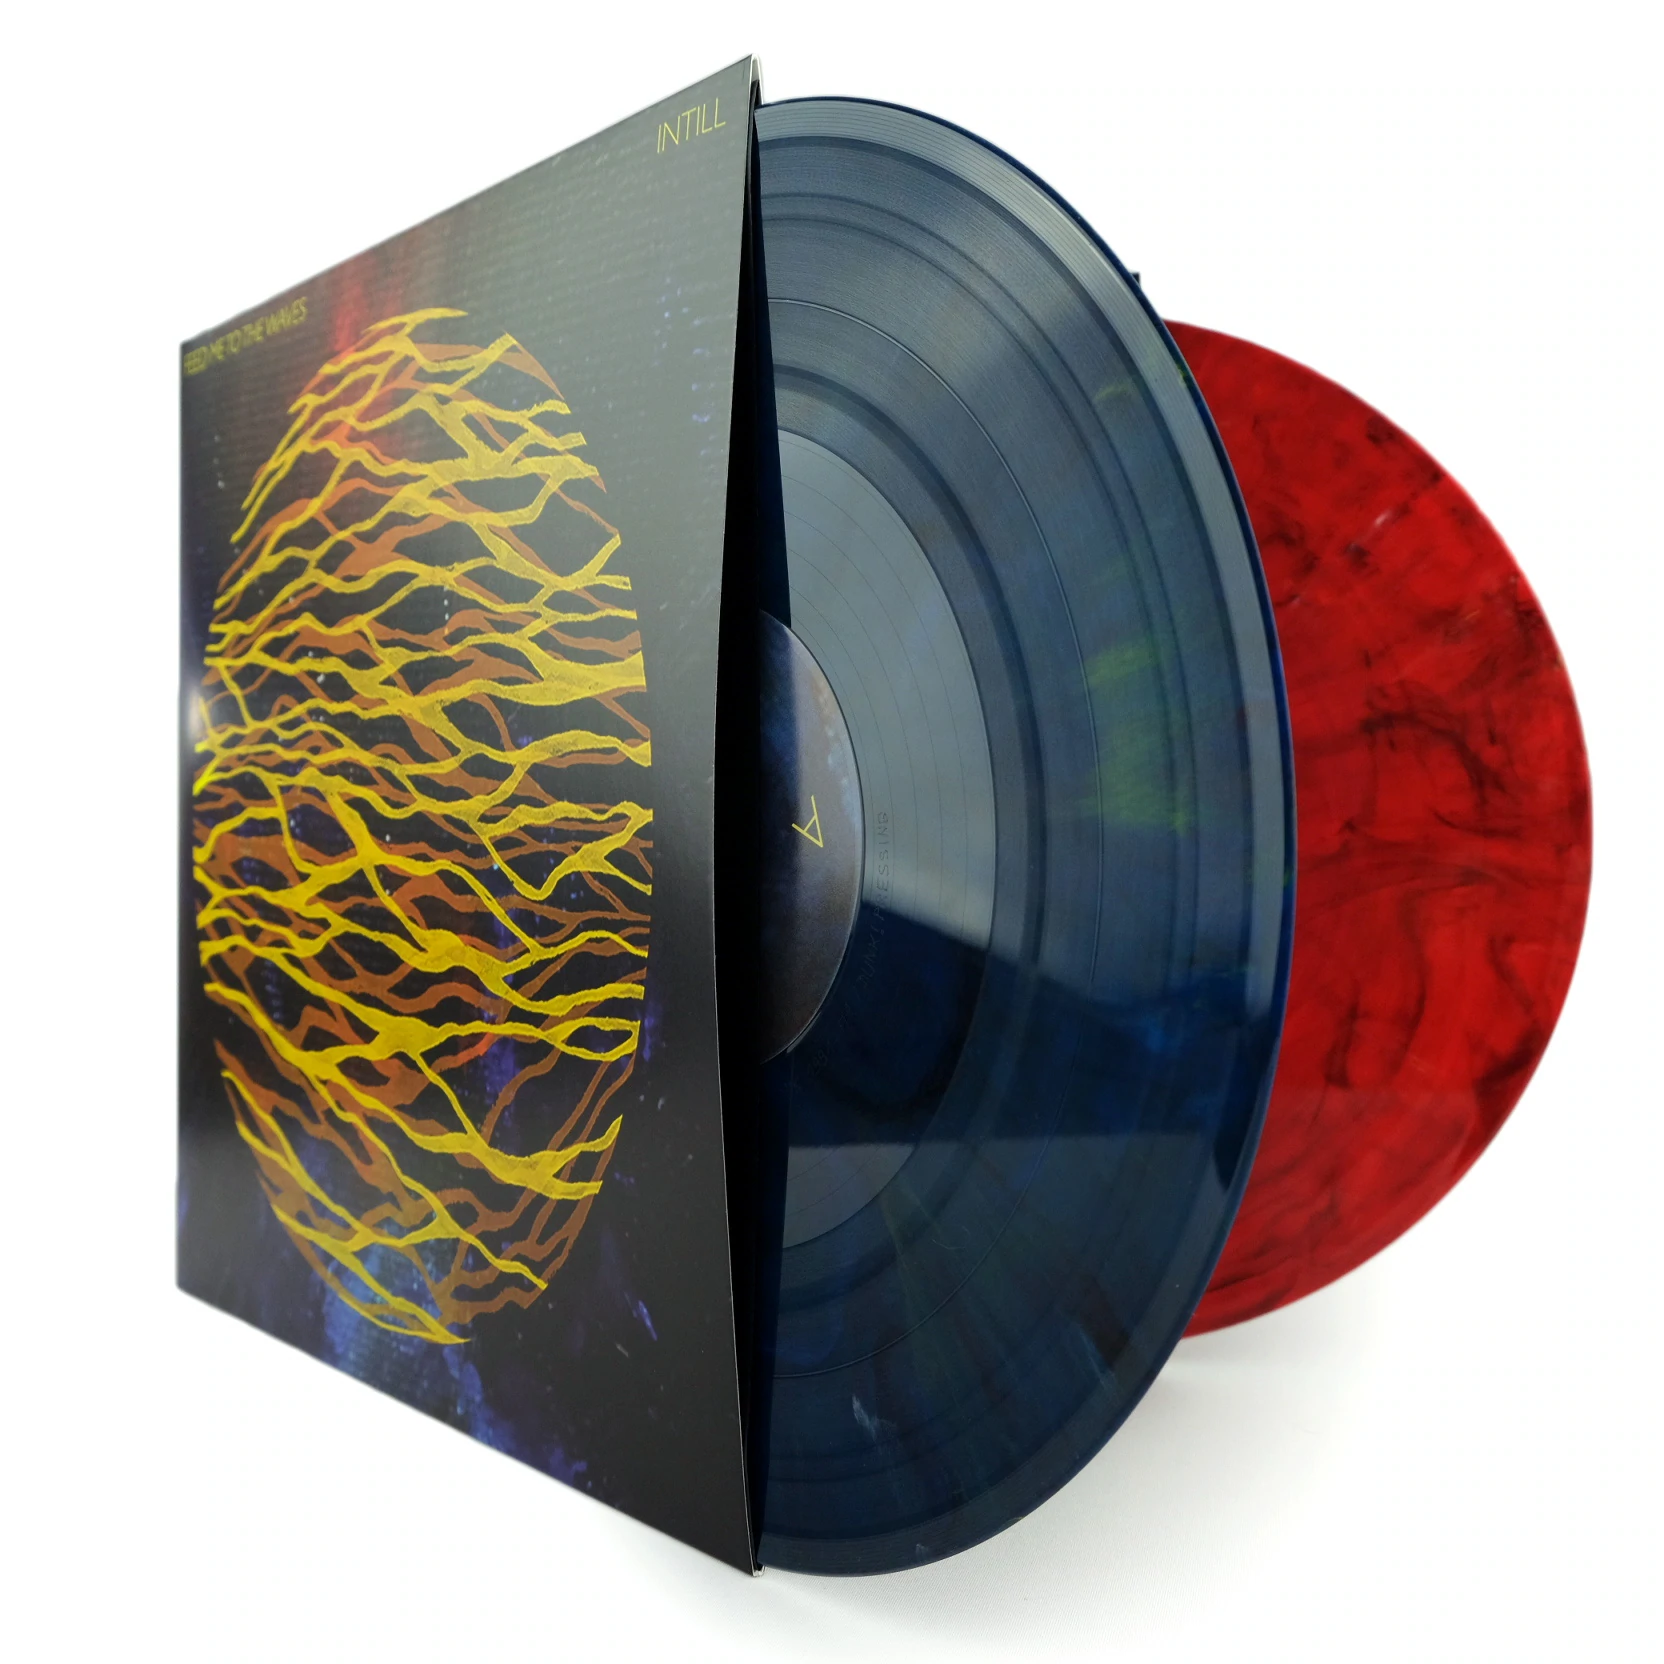 FEED ME TO THE WAVES // INTILL - BLUE & RED VINYL (2LP)